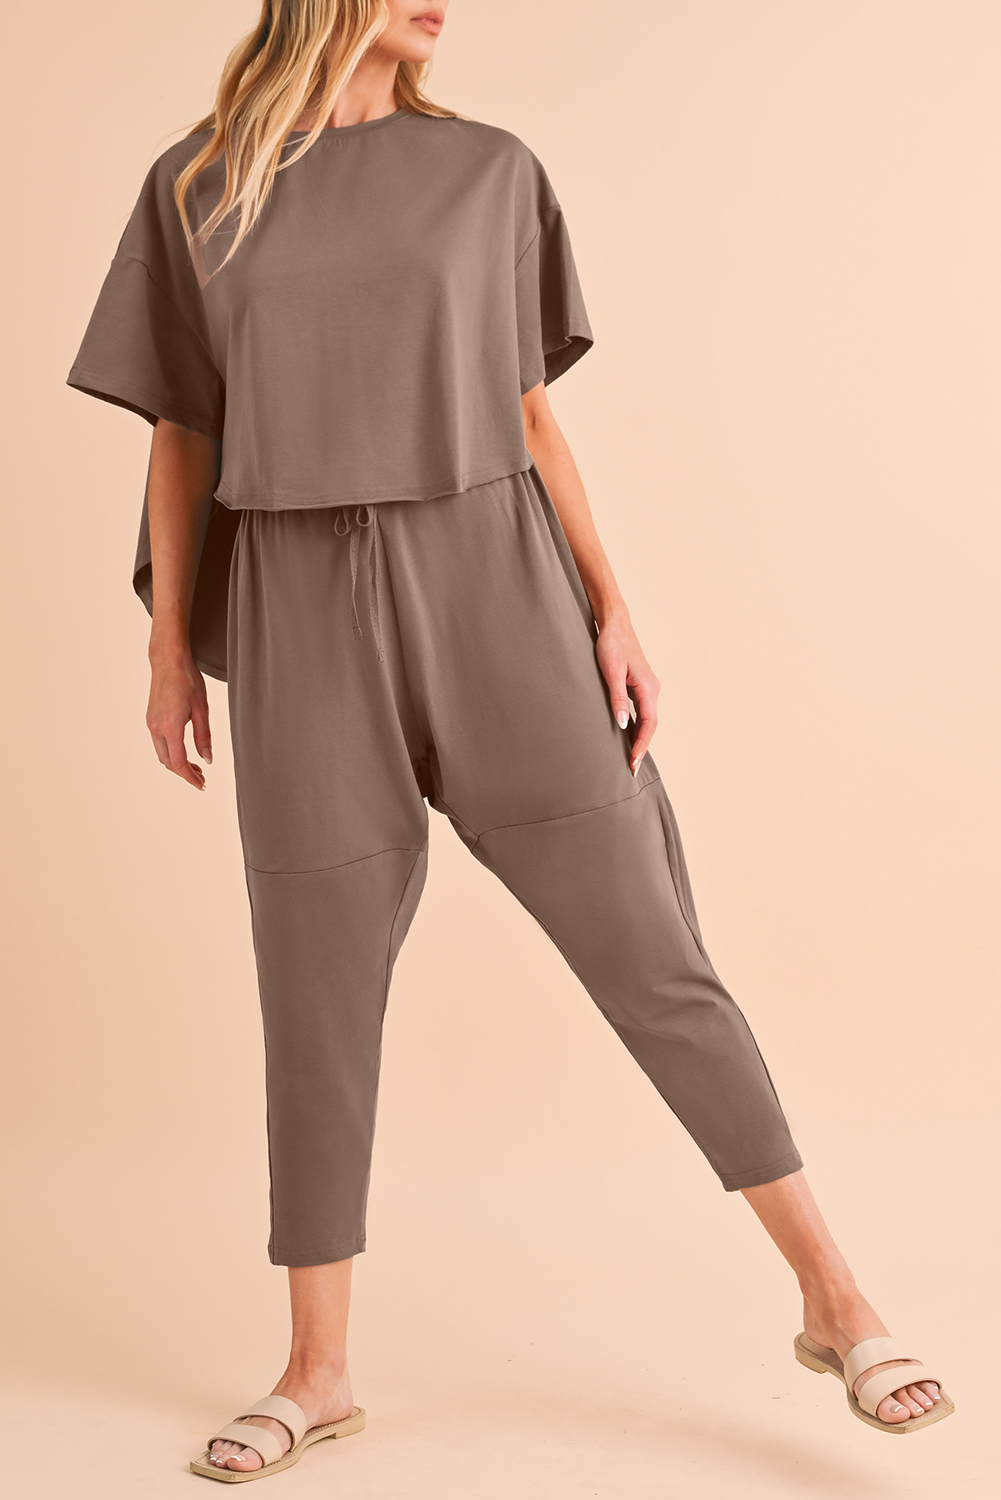 Taupe Batwing Sleeve High Low Tee and Drawstring Crop PANTS Set